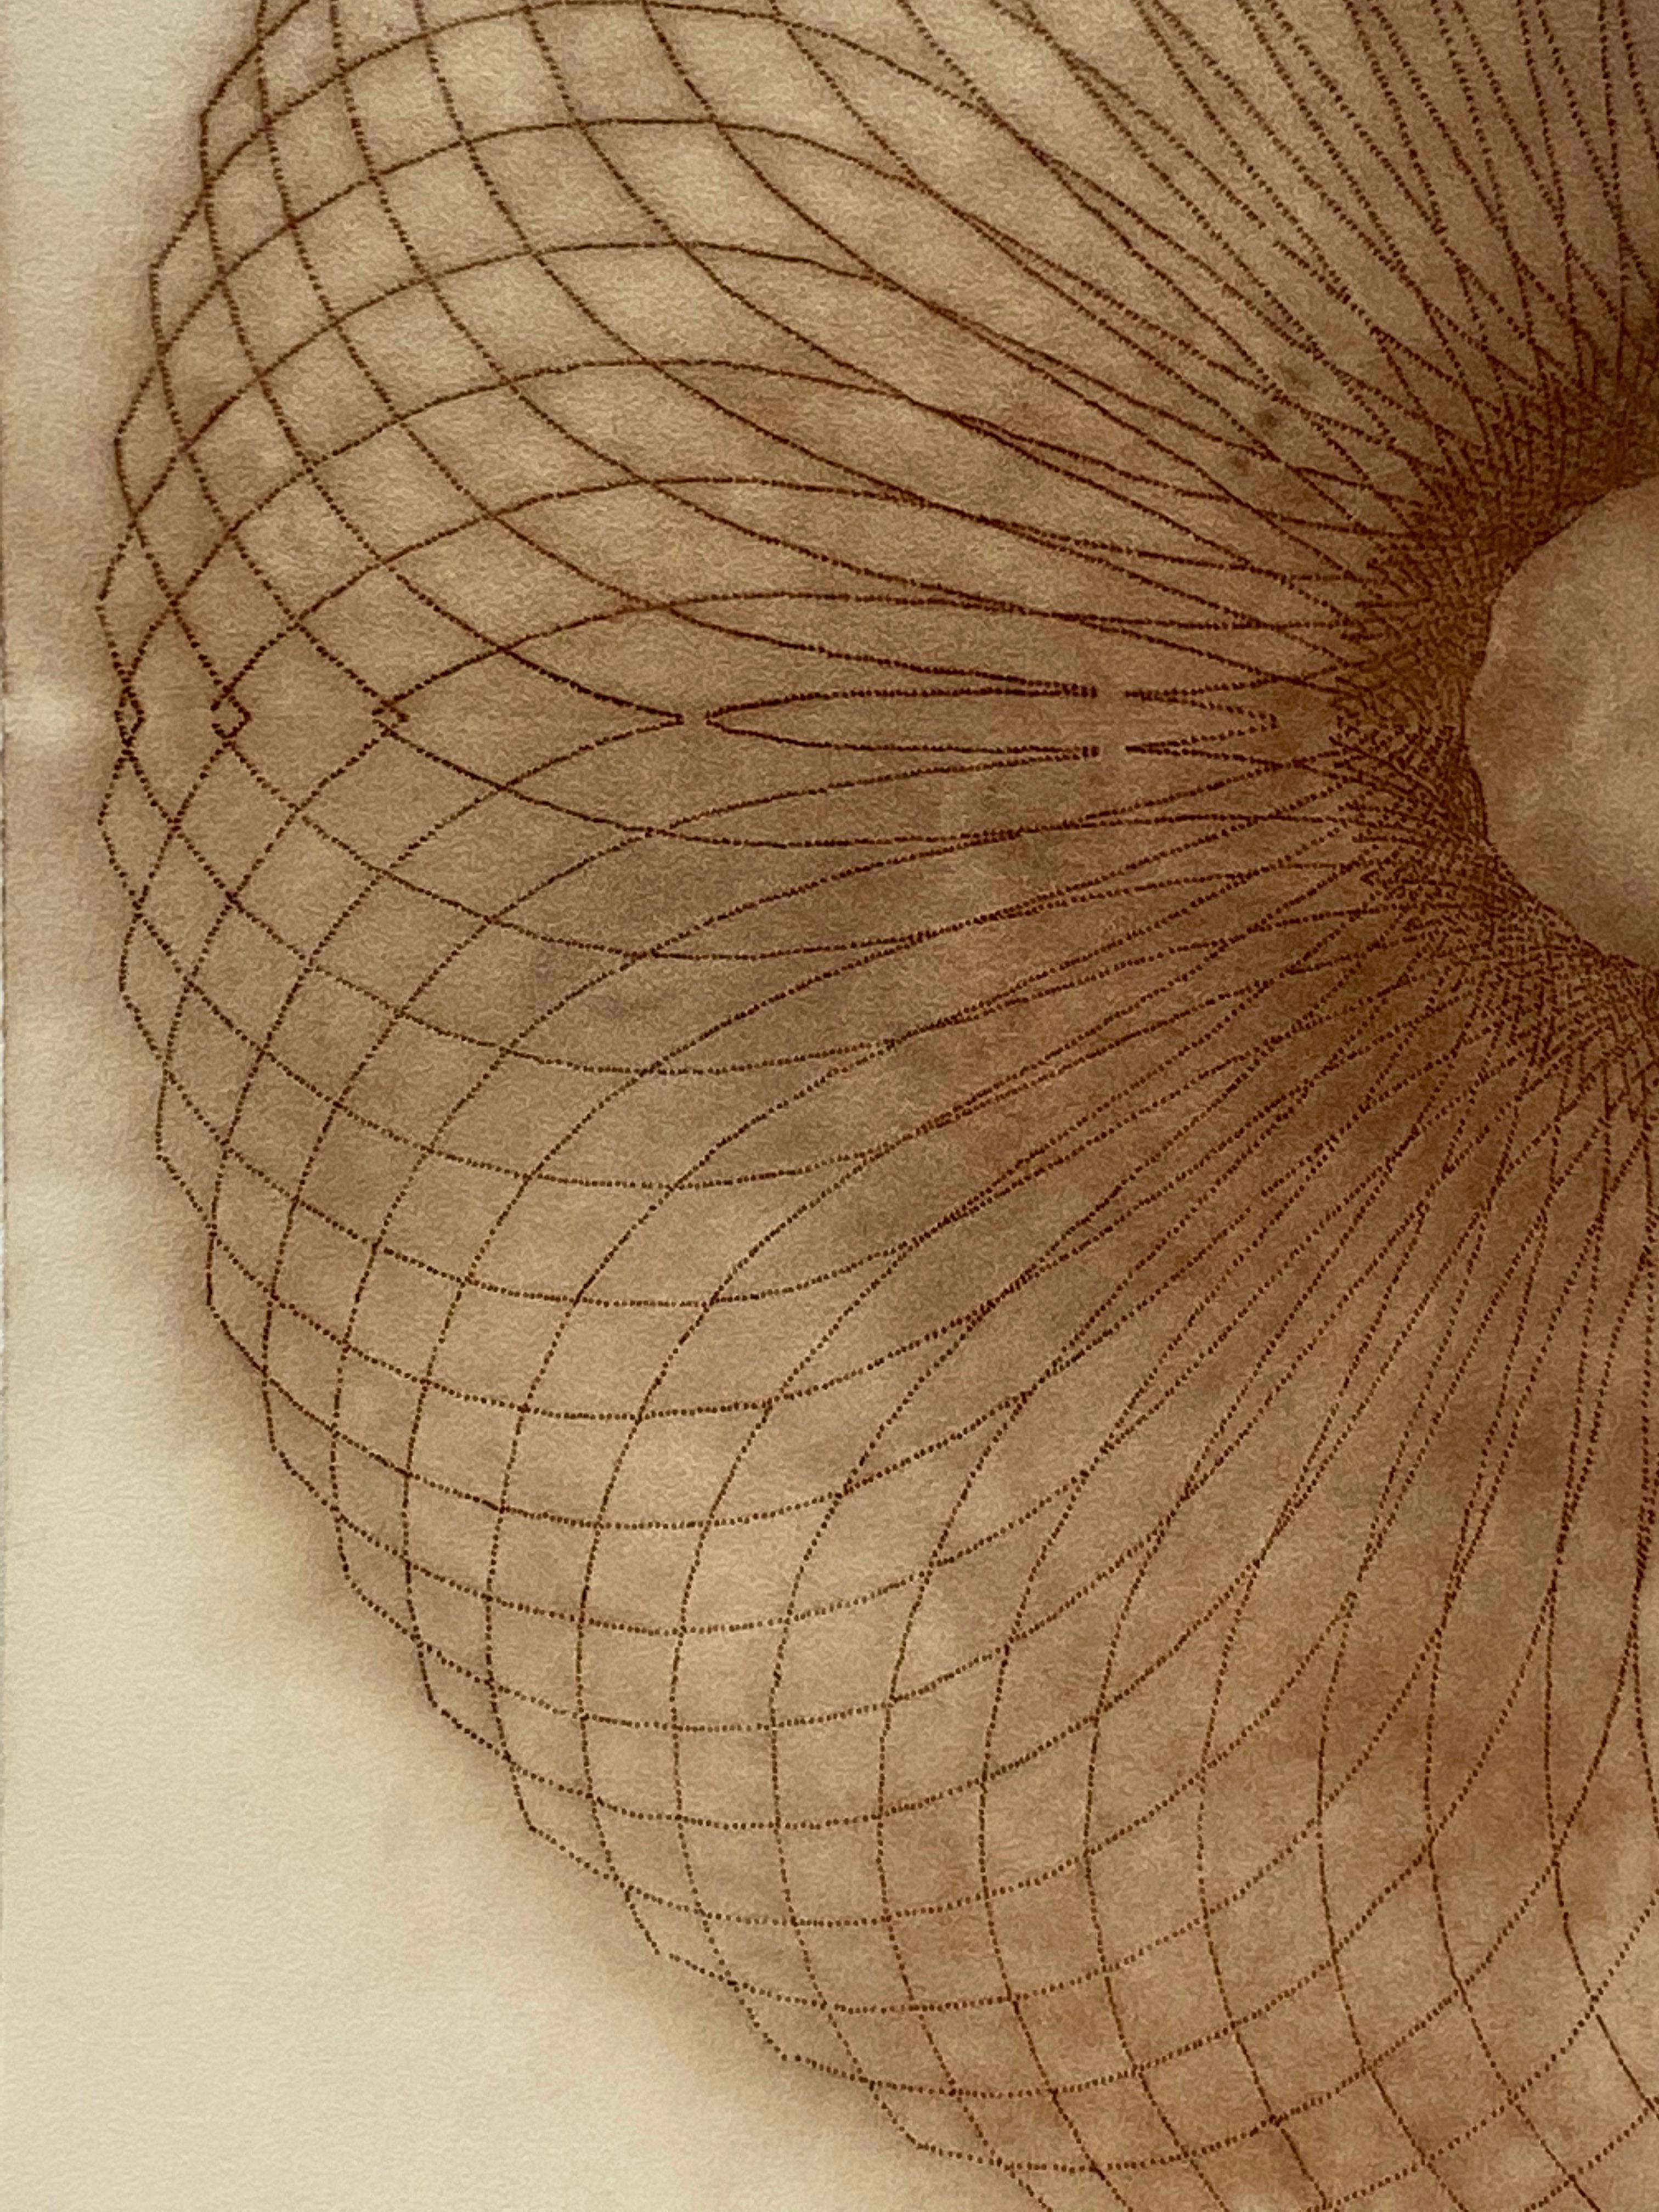 Exotic Hex Series 12 01, Square Reddish Brown Circular Mandala Line Drawing - Beige Abstract Drawing by Mary Judge